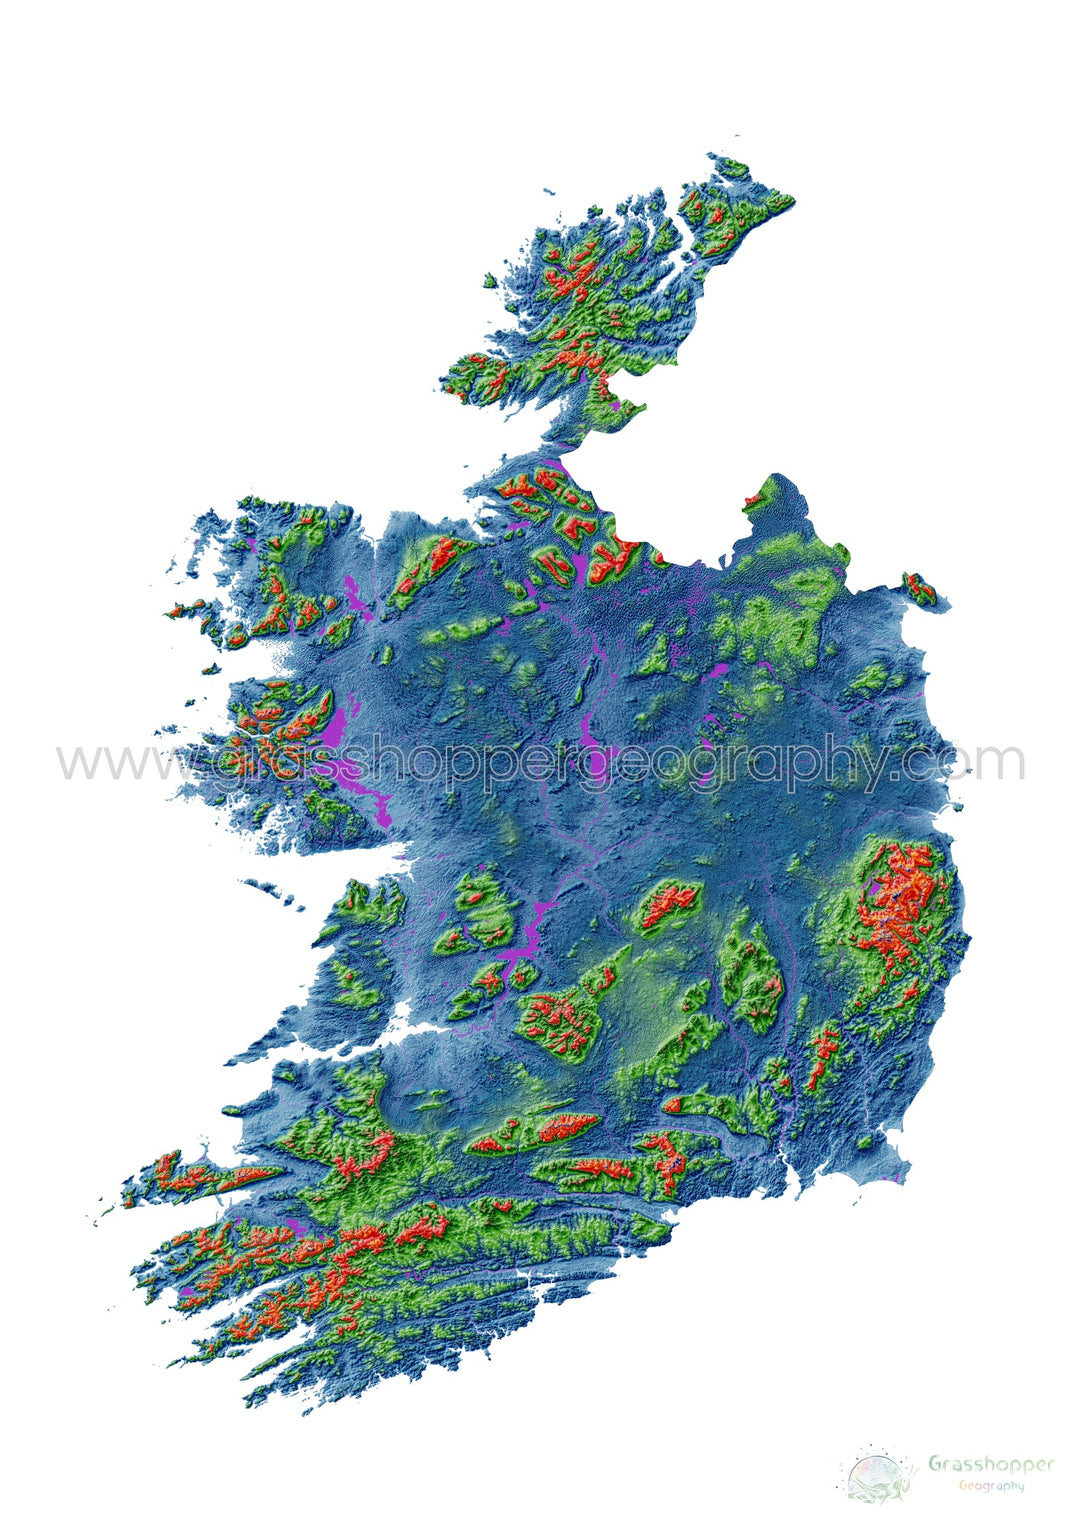 Elevation map of Ireland with white background - Fine Art Print